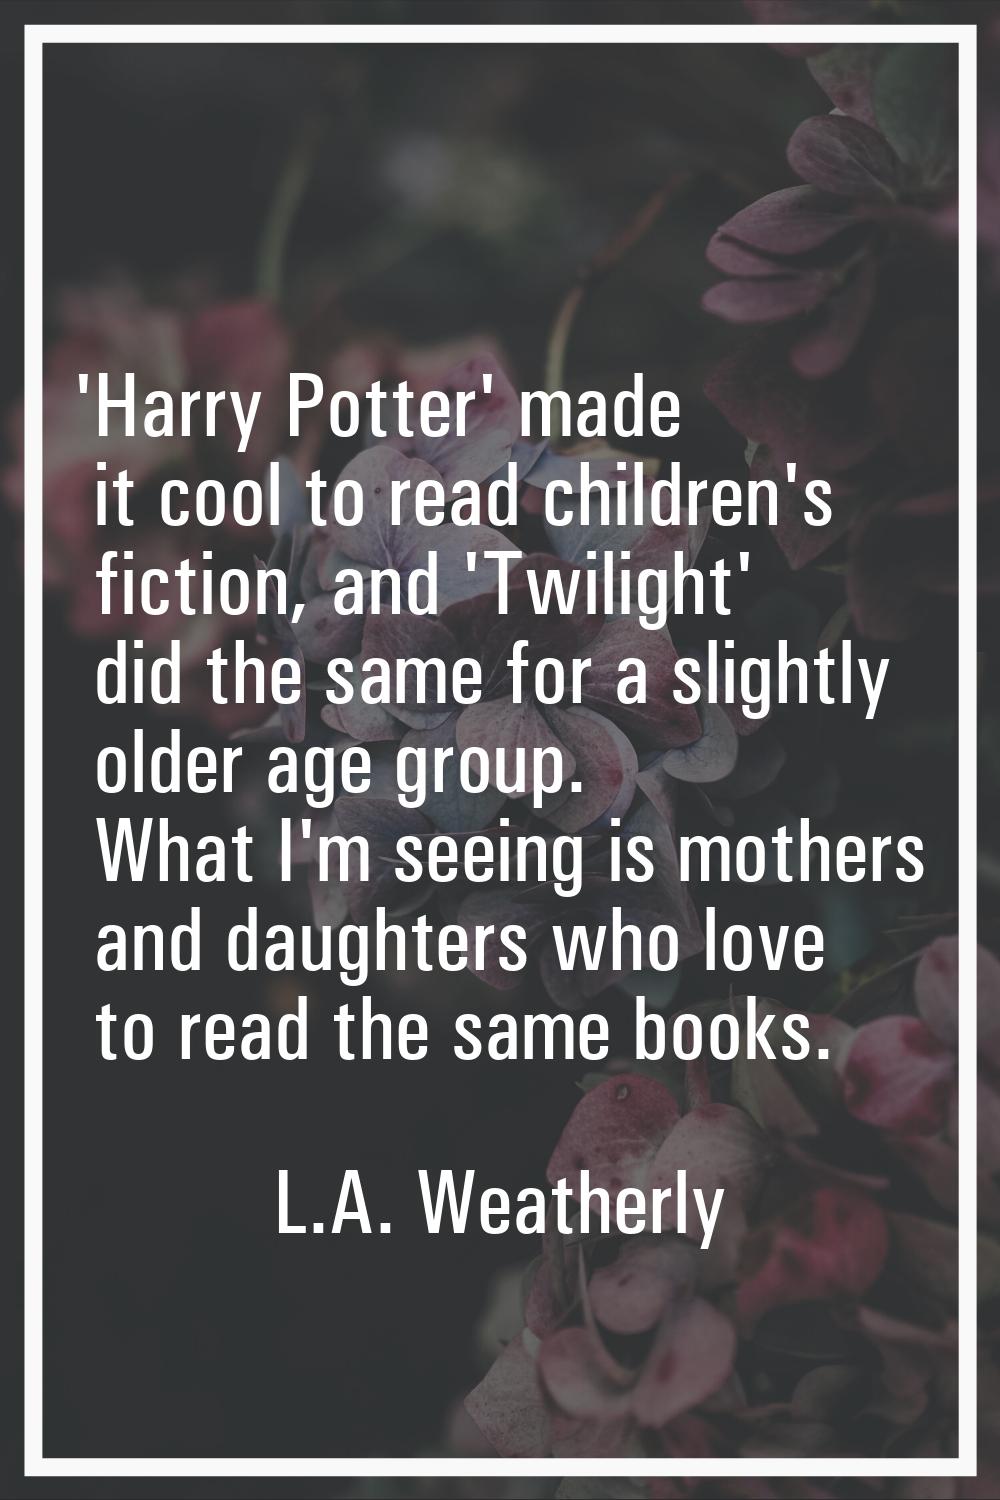 'Harry Potter' made it cool to read children's fiction, and 'Twilight' did the same for a slightly 